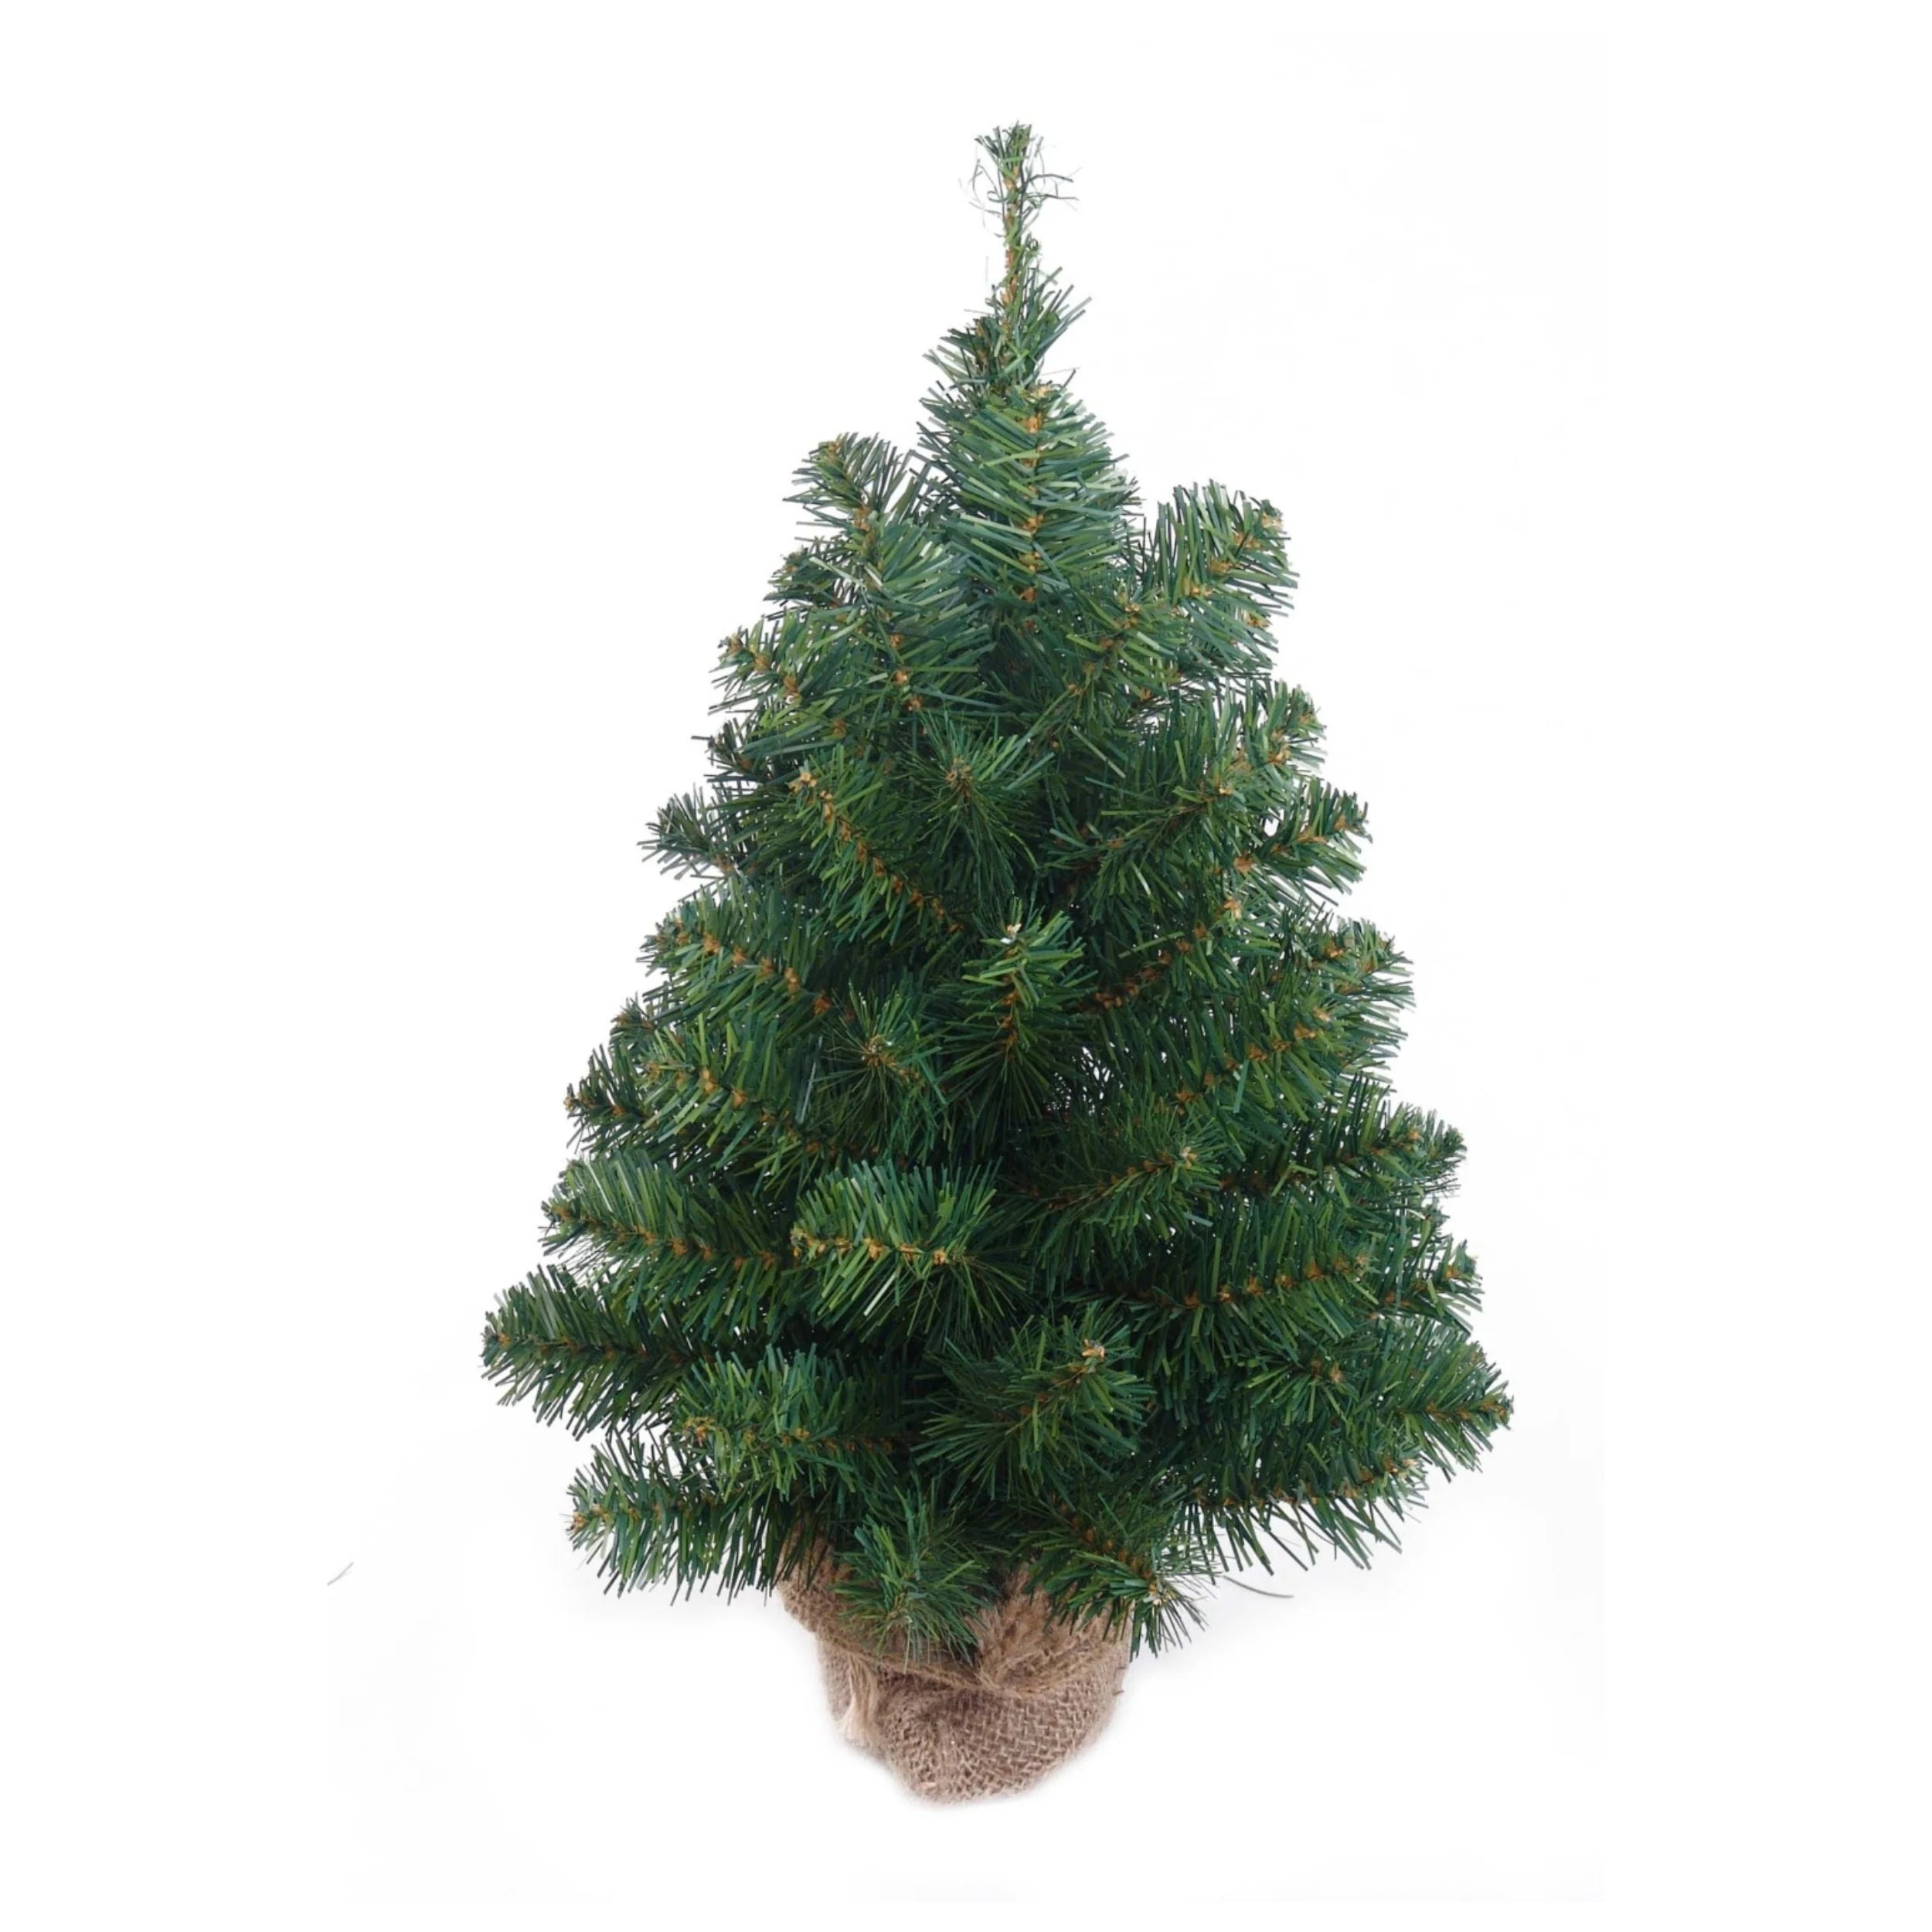 18" Northern Spruce Tree in Burlap - 63 Green Tips